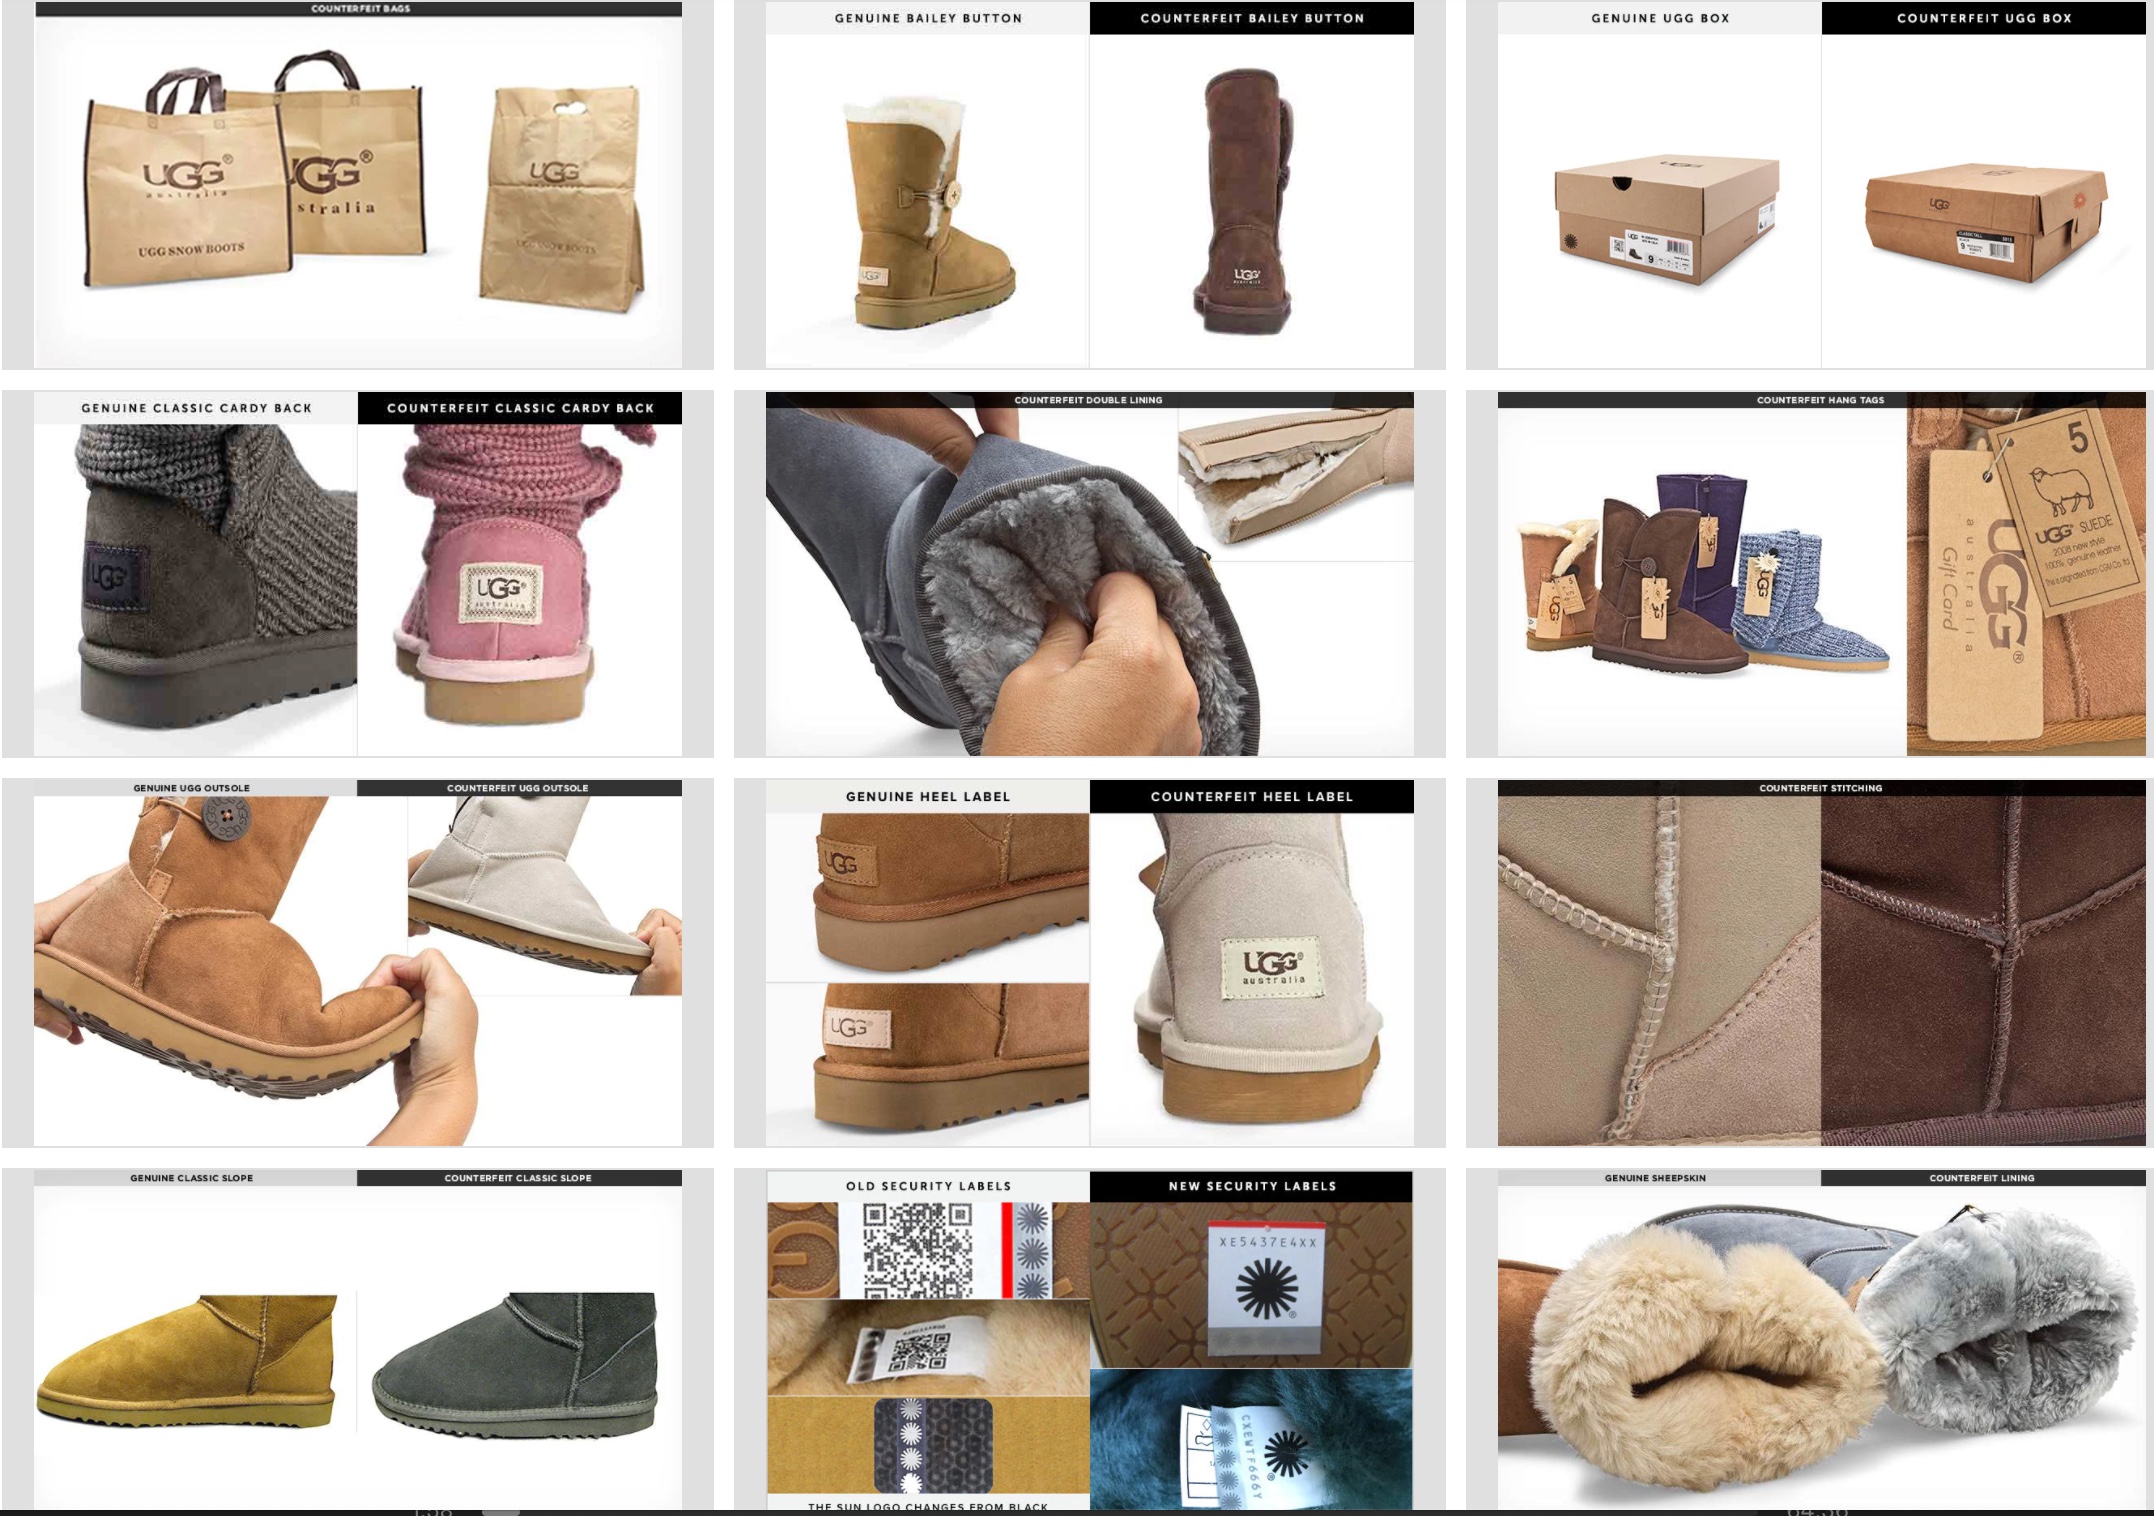 Visual differences between genuine and counterfeit UGG boots